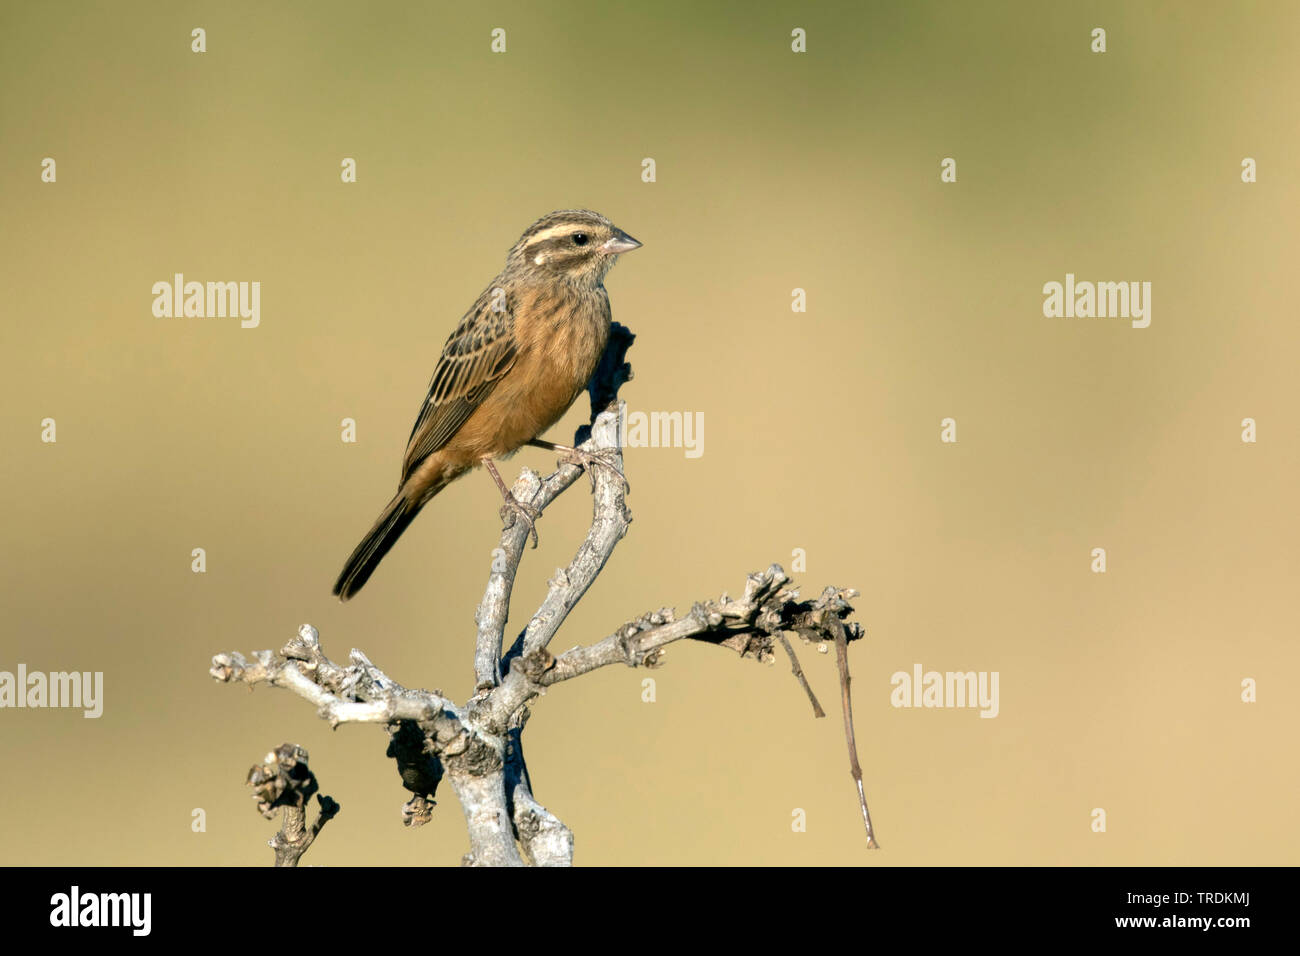 cinnamon-breasted rock bunting (Emberiza tahapisi), sitting on a branch, South Africa, Krueger National Park Stock Photo